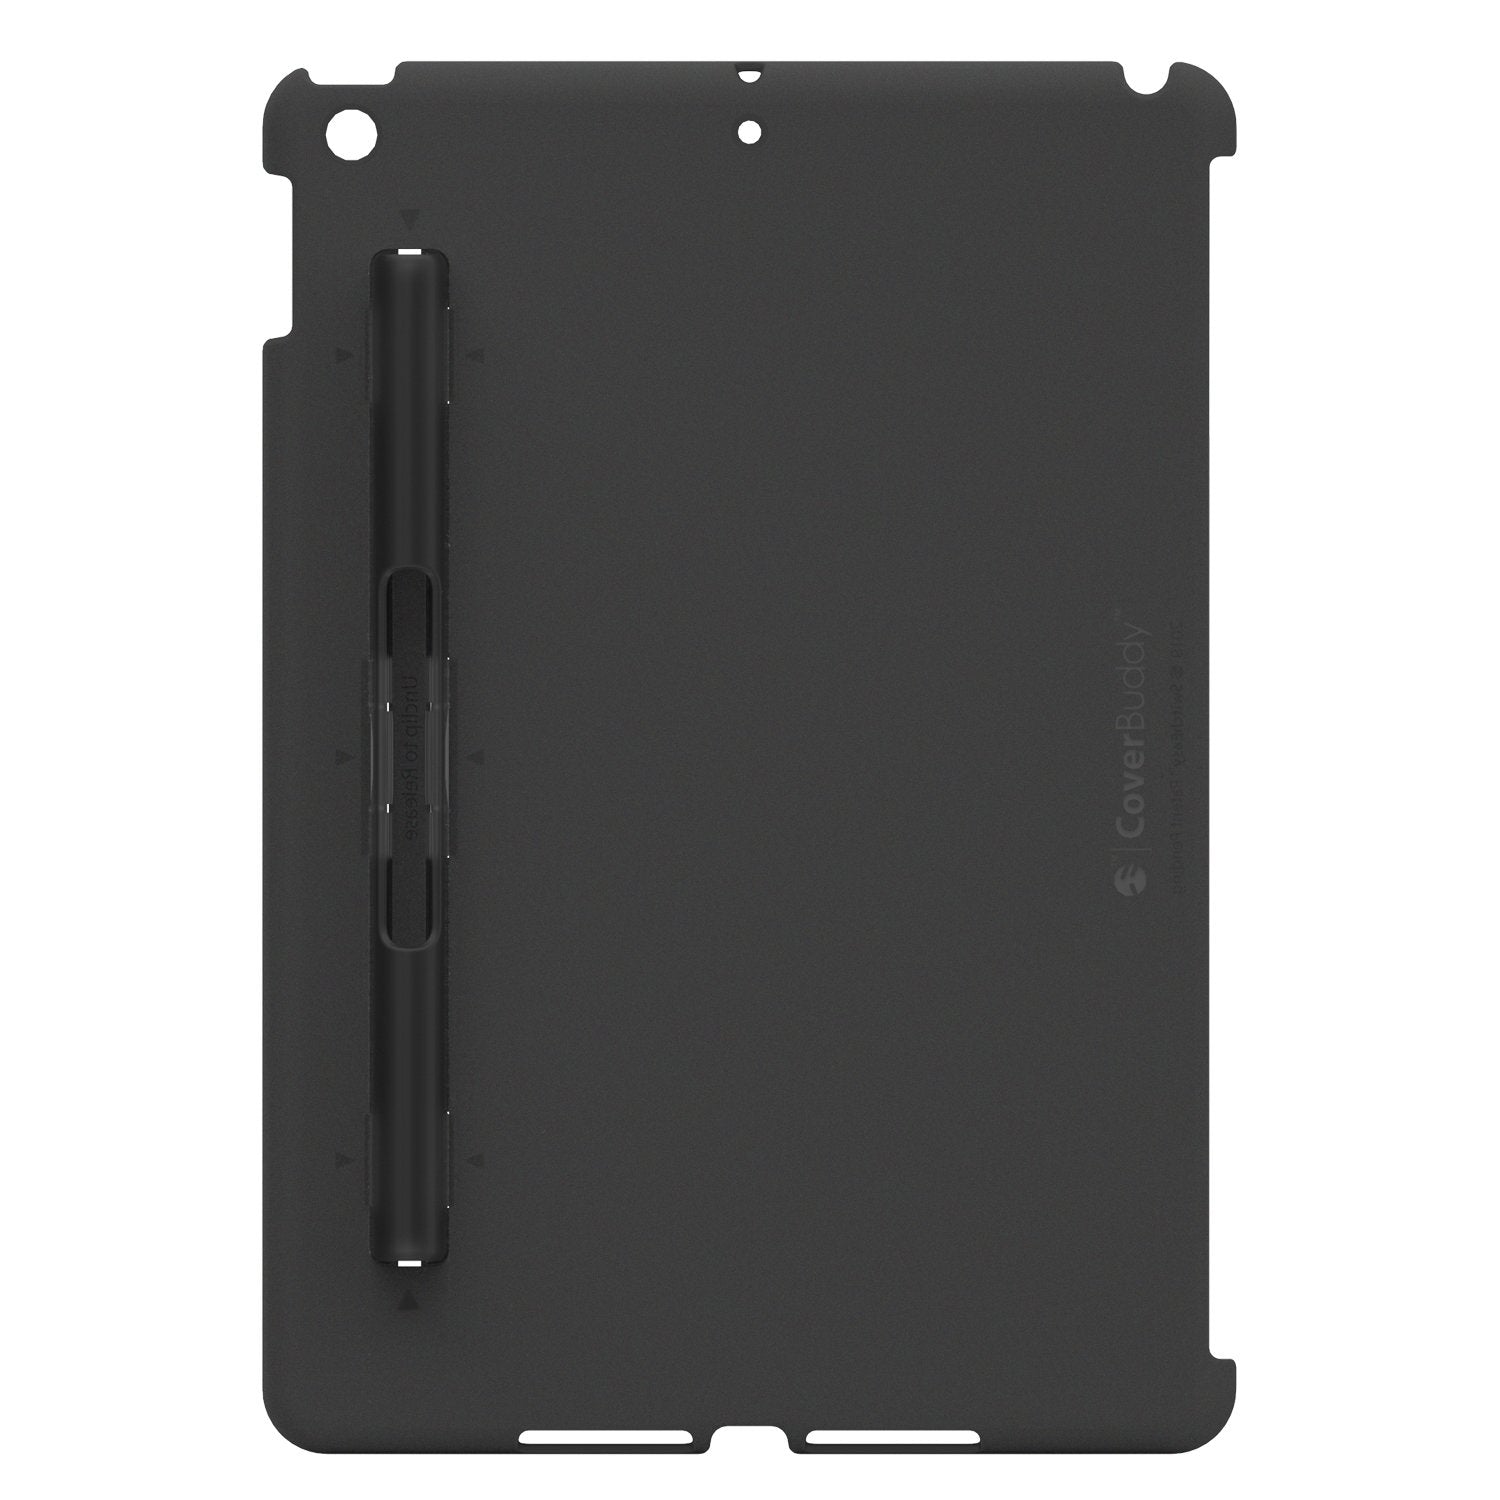 Switcheasy CoverBuddy Case for iPad Pro 10.2 Keyboard Compatible with Pencil Holder, Smoke Default Switcheasy 